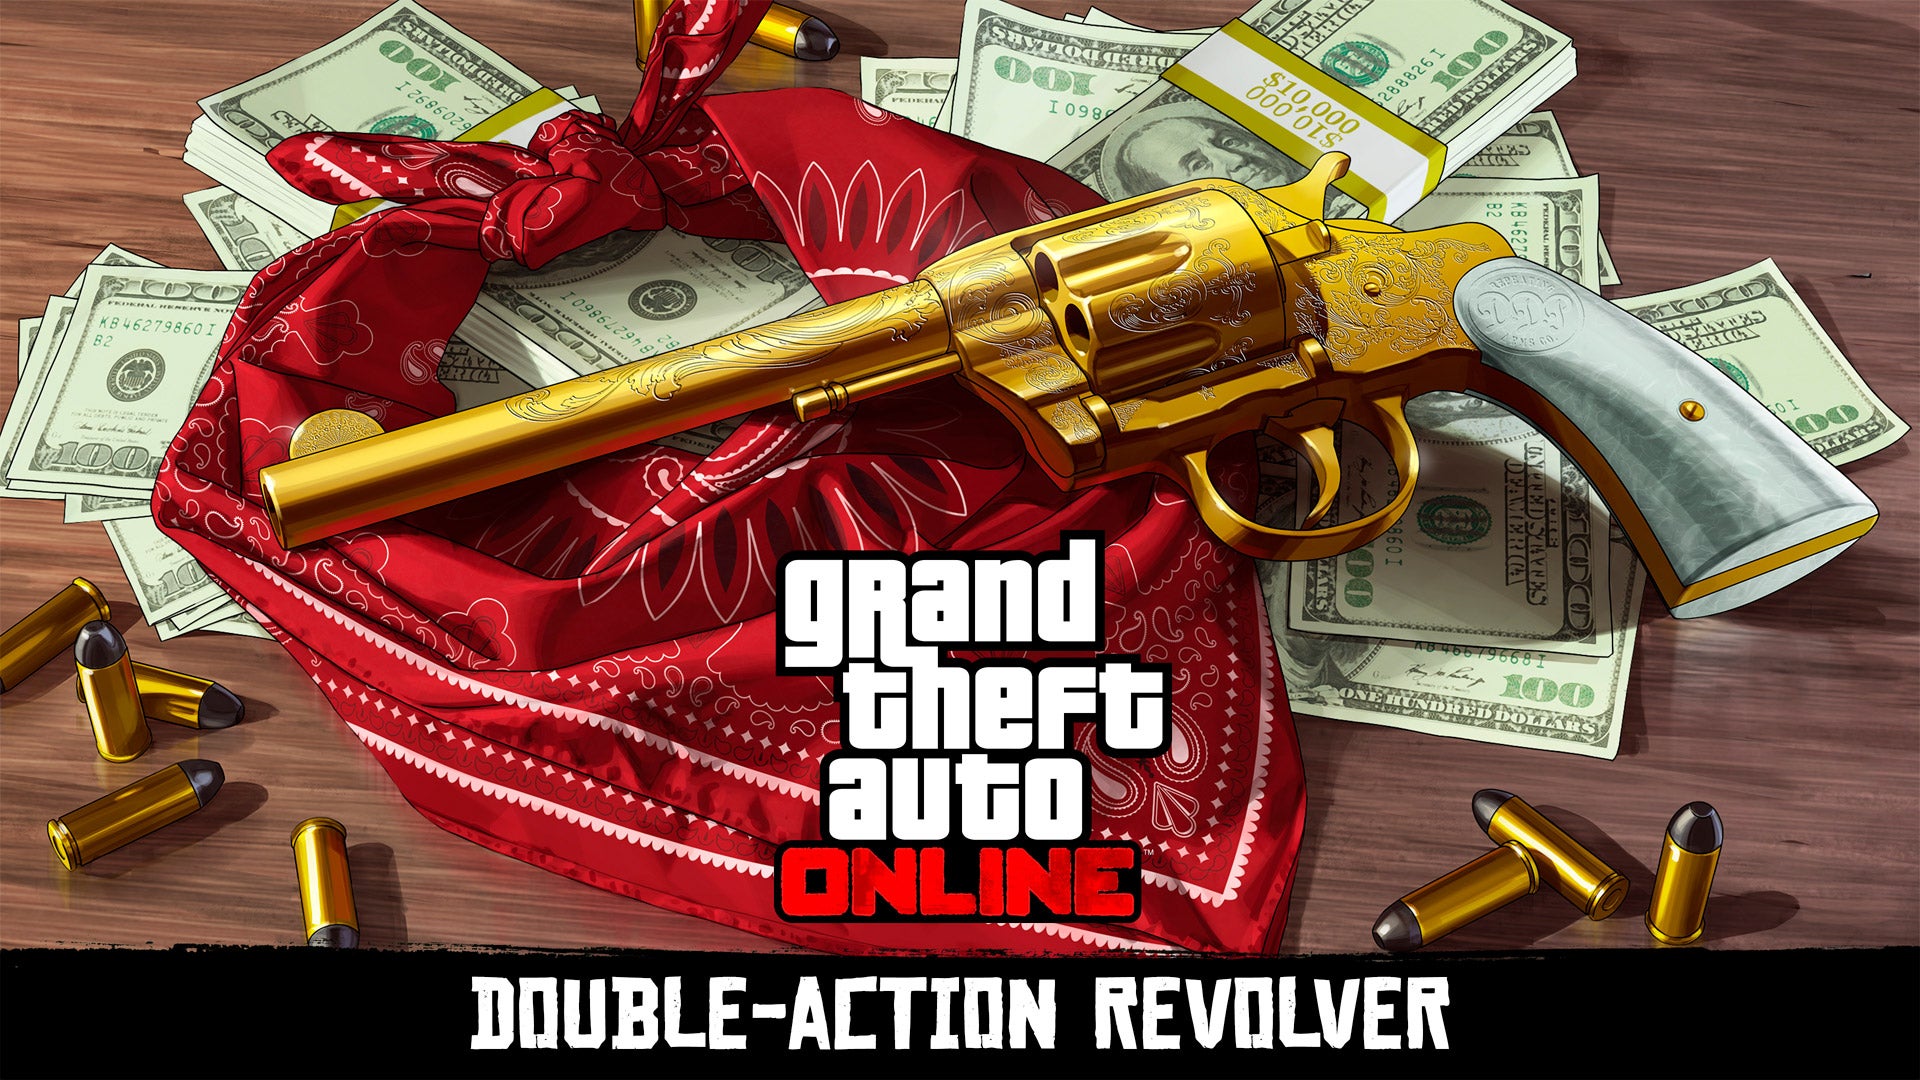 Auto Land med statsborgerskab Legitim Red Dead Redemption 2: how to unlock the Double-Action Revolver and where  to find it | VG247